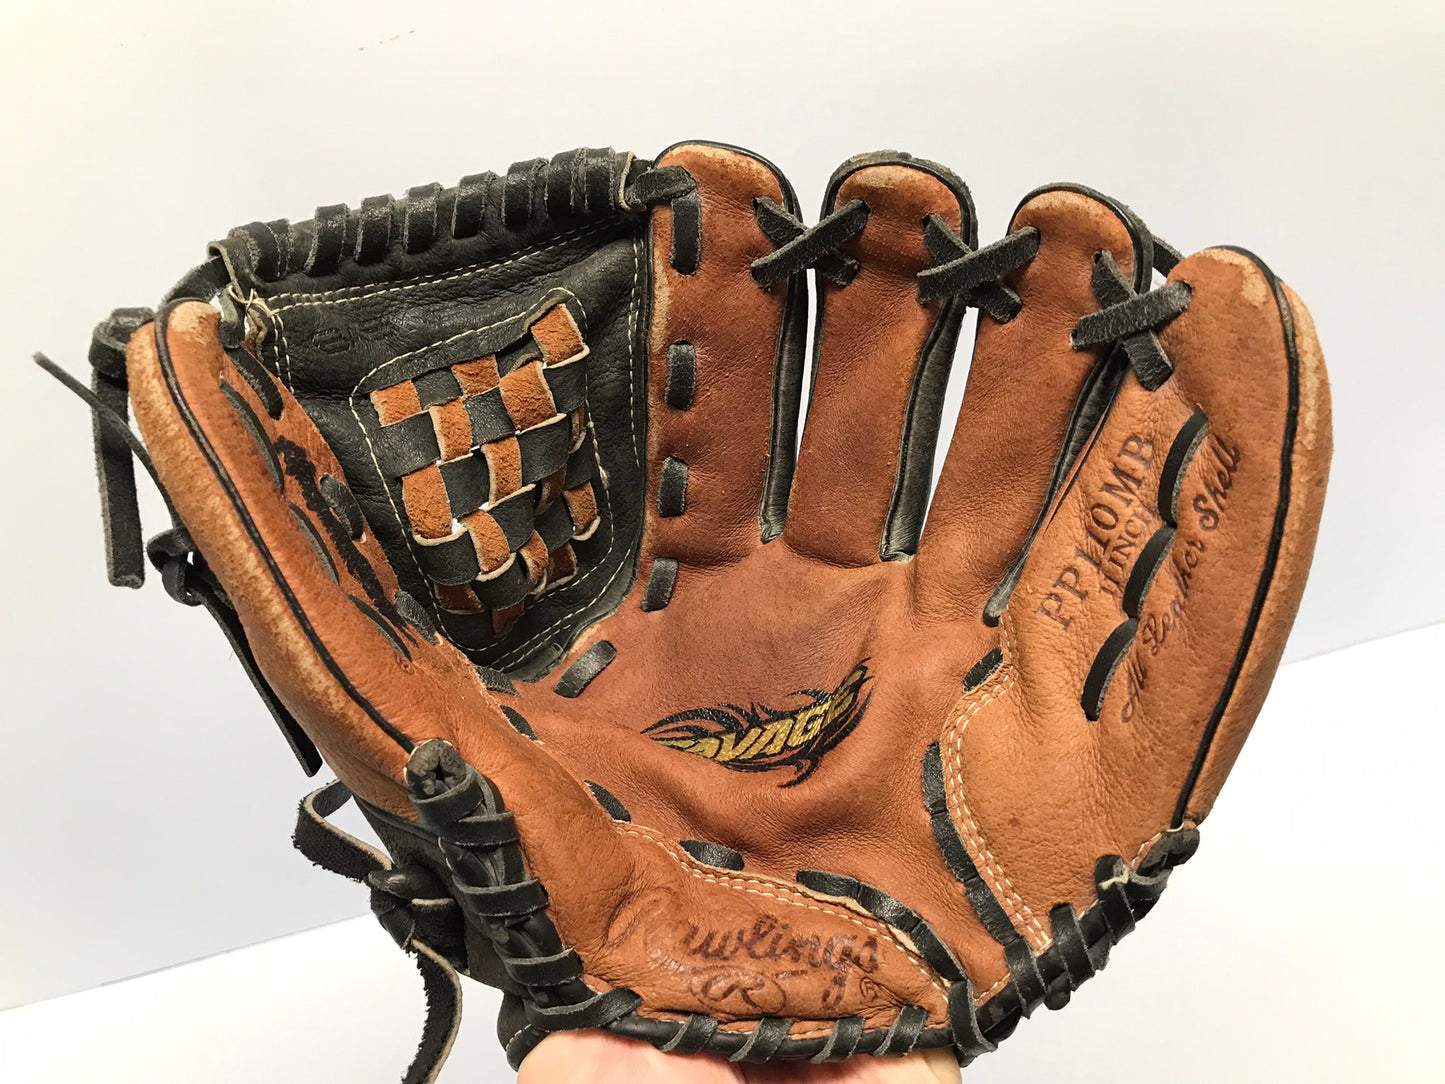 Baseball Glove Child Size 11 inch Rawlings Savage Soft Brown Black Leather Fits on Left Hand